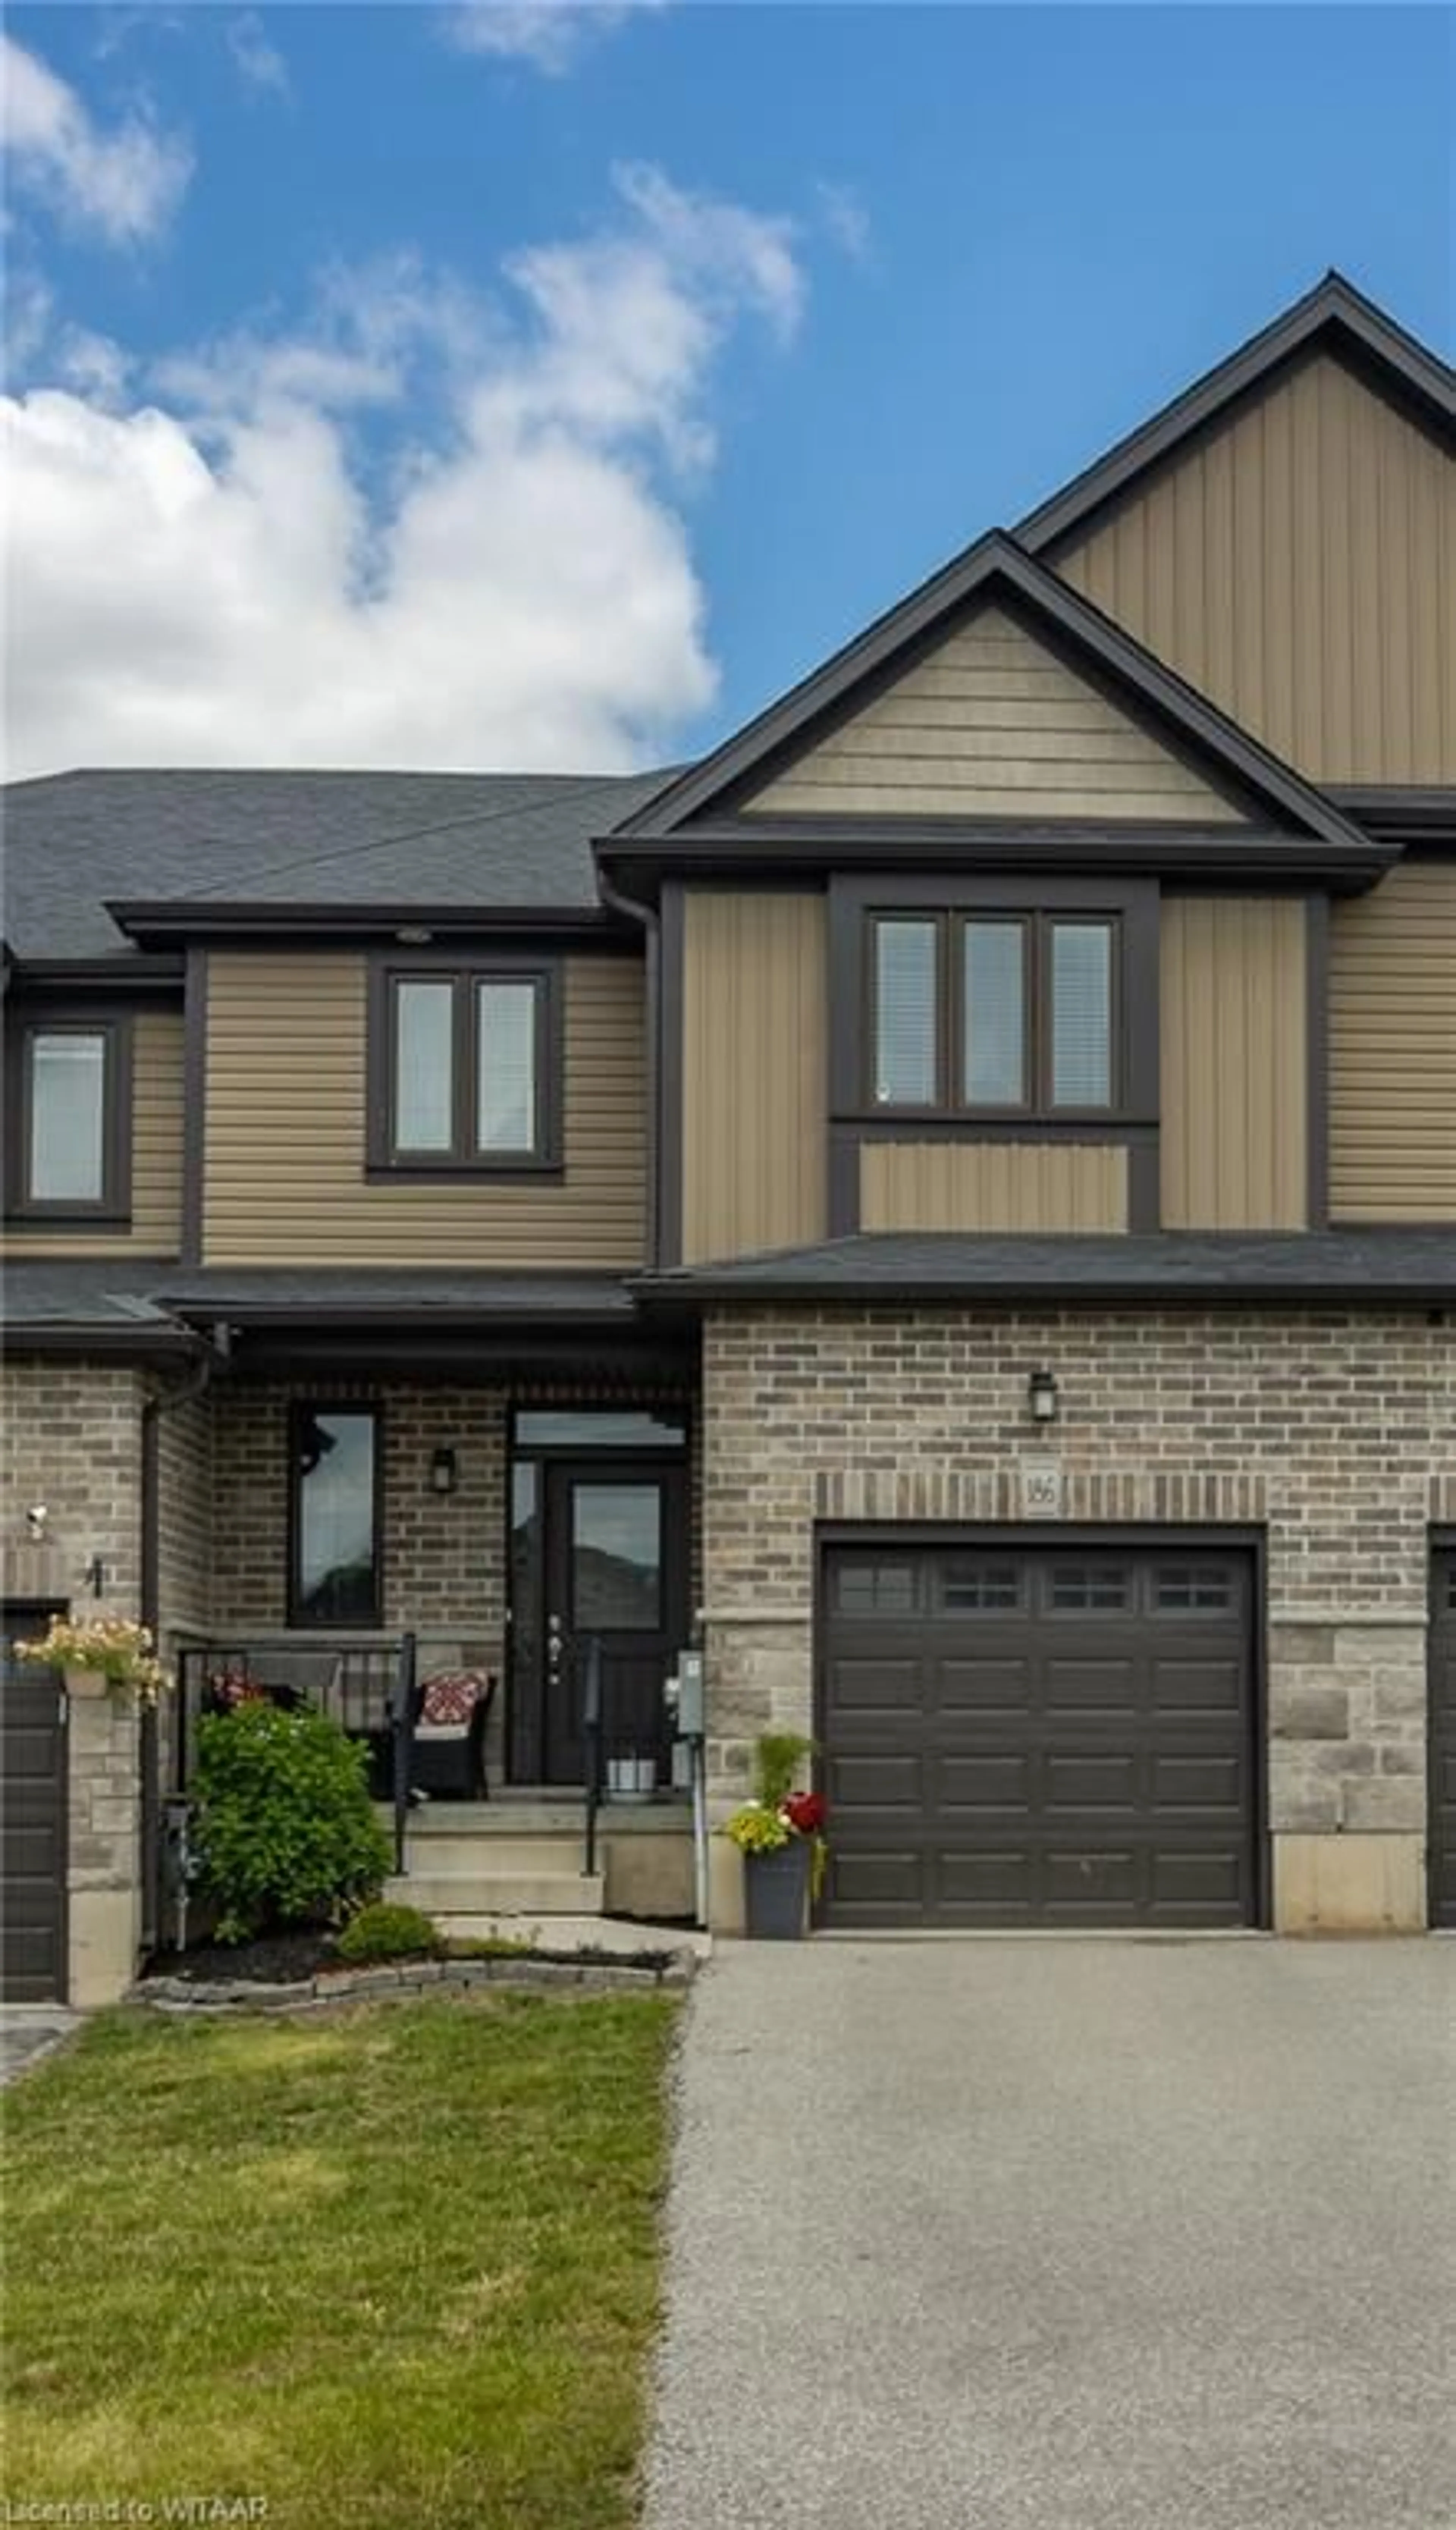 Home with brick exterior material for 186 Wedgewood Dr Dr, Woodstock Ontario N4T 0K1